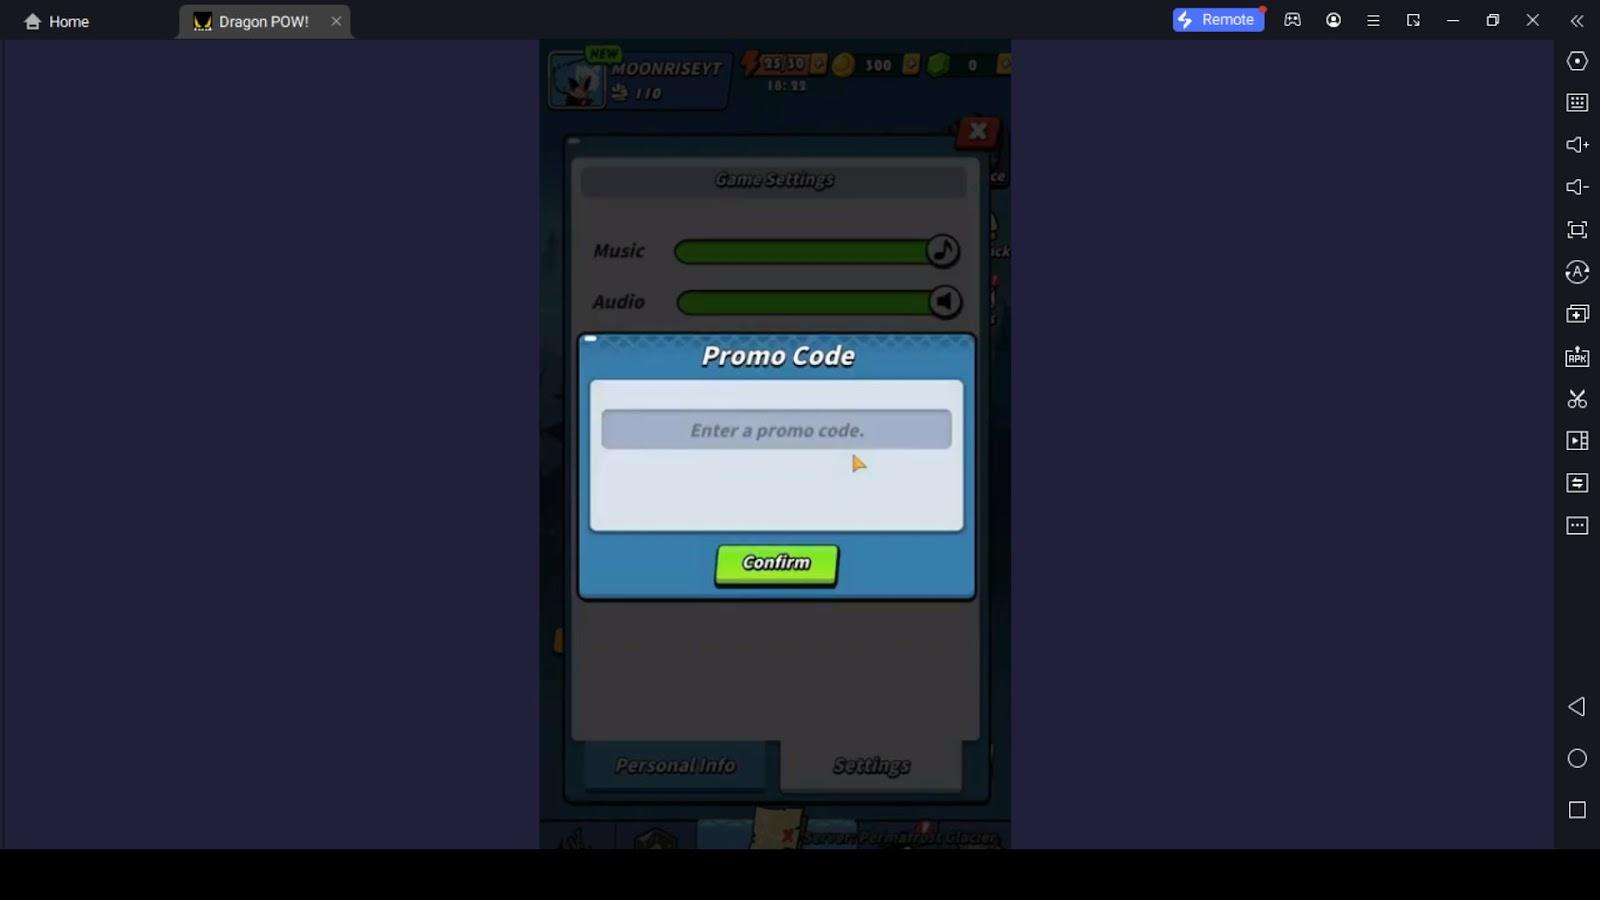 Redeeming Steps for Codes in Dragon POW